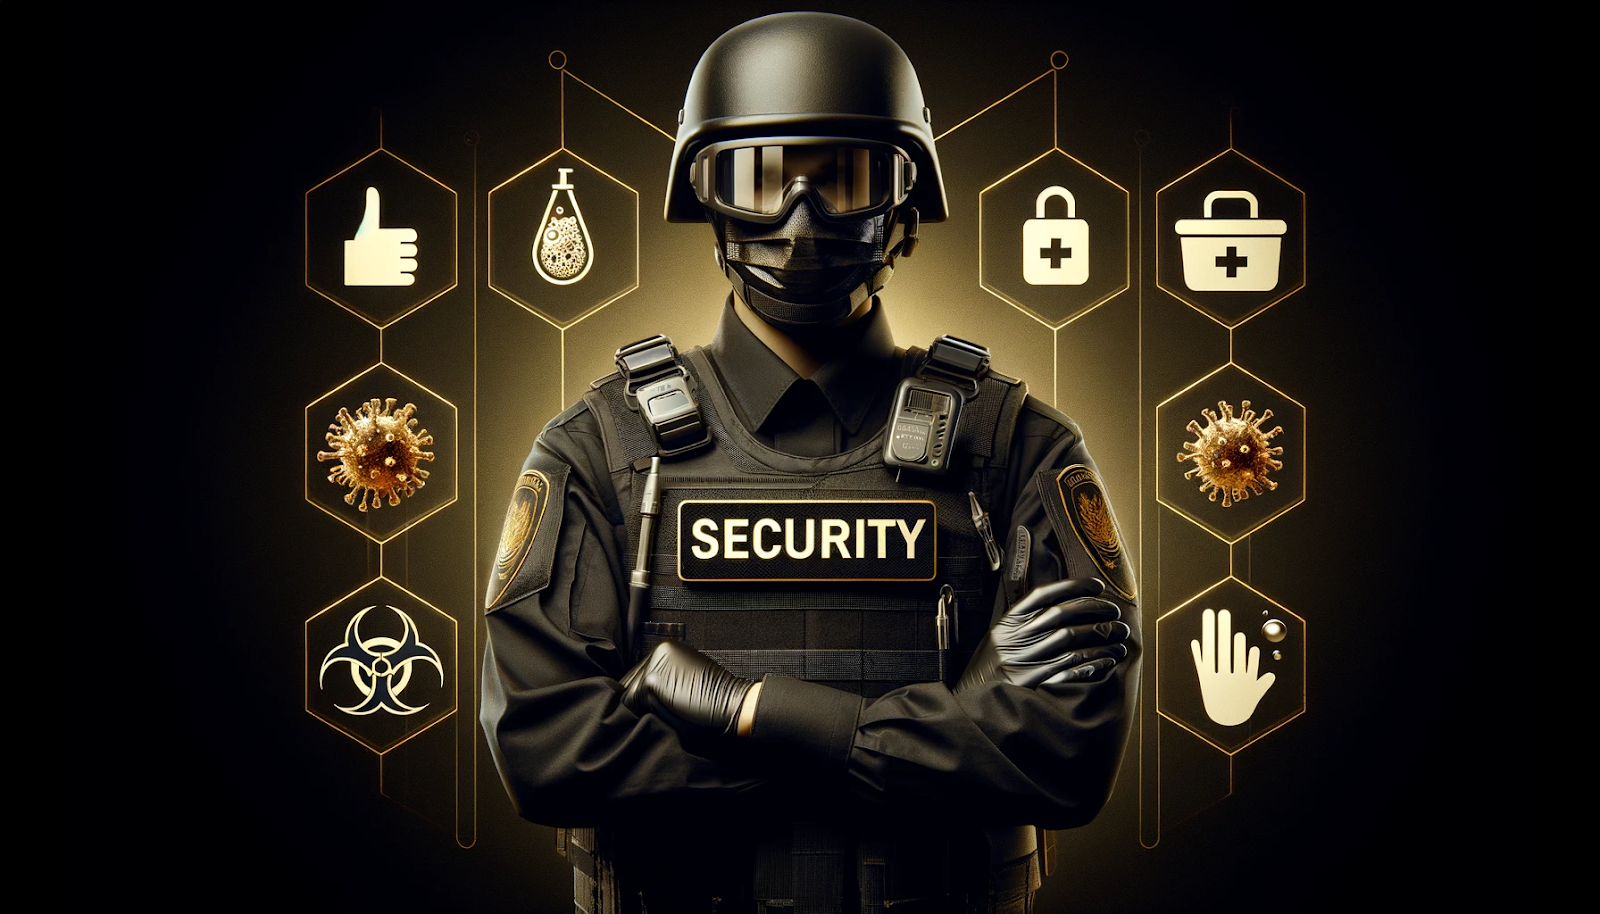 A photorealistic image symbolizing communicable disease prevention in security roles, featuring black and gold colors.  